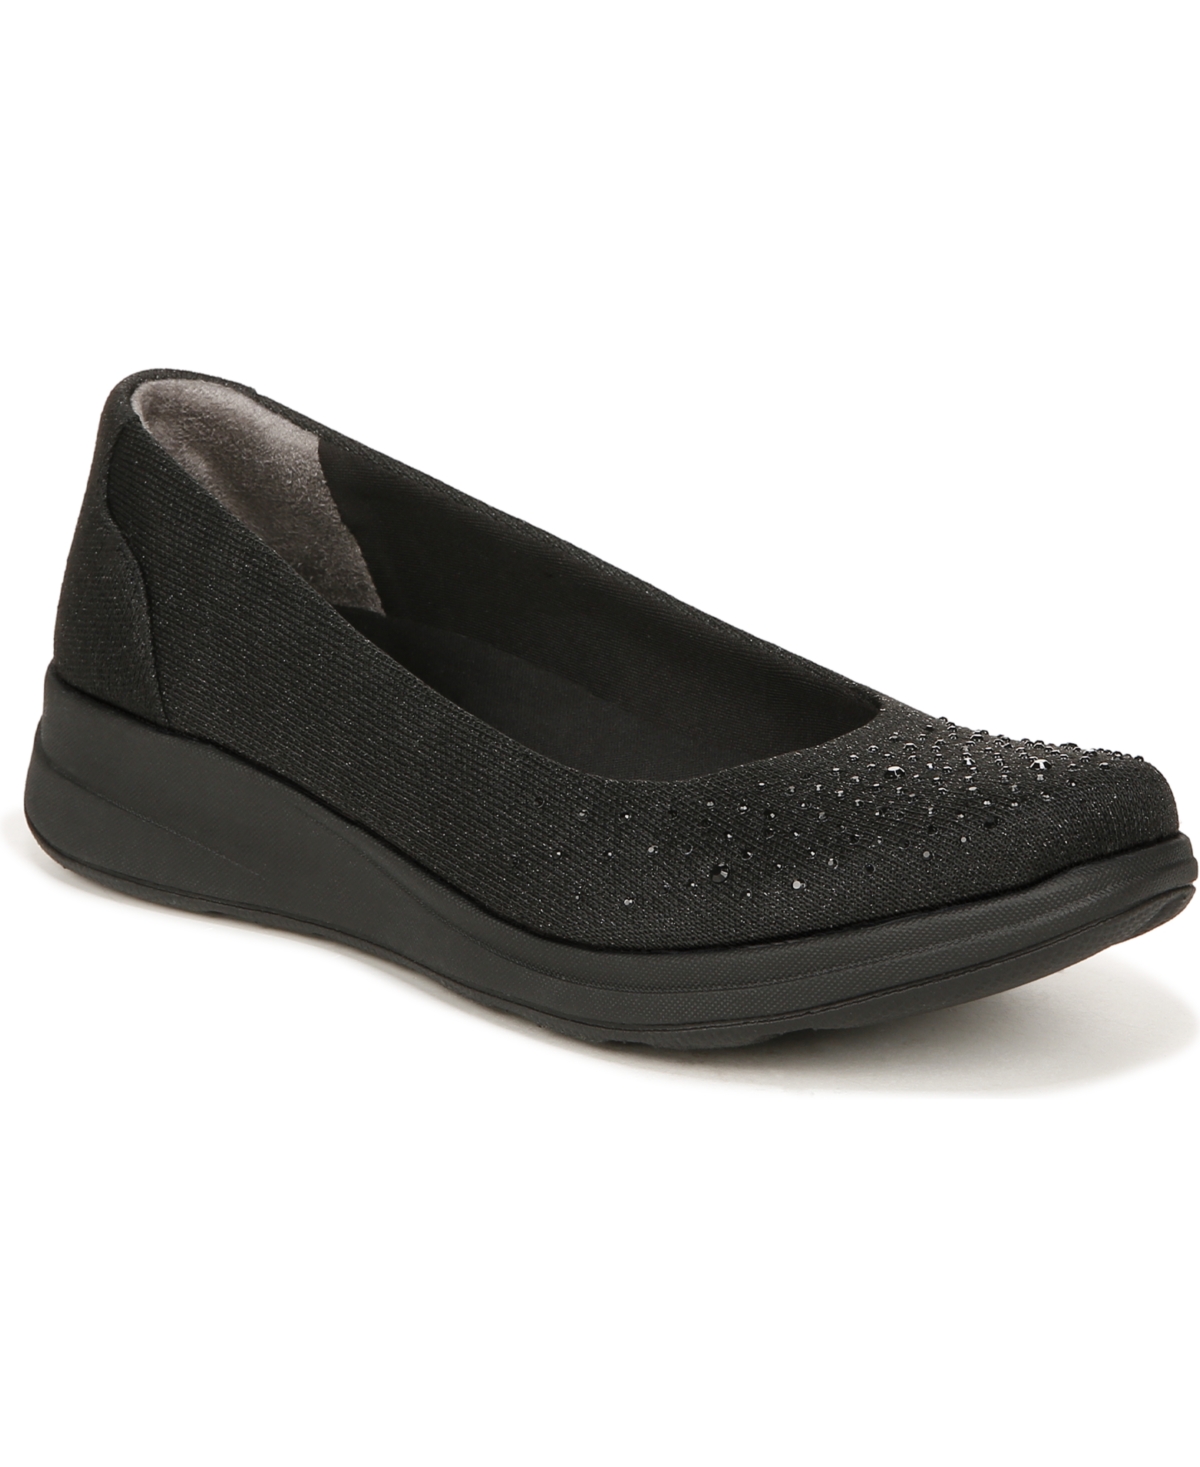 Bzees Premium Golden Bright Washable Slip-ons In Black Sparkle Knit Fabric